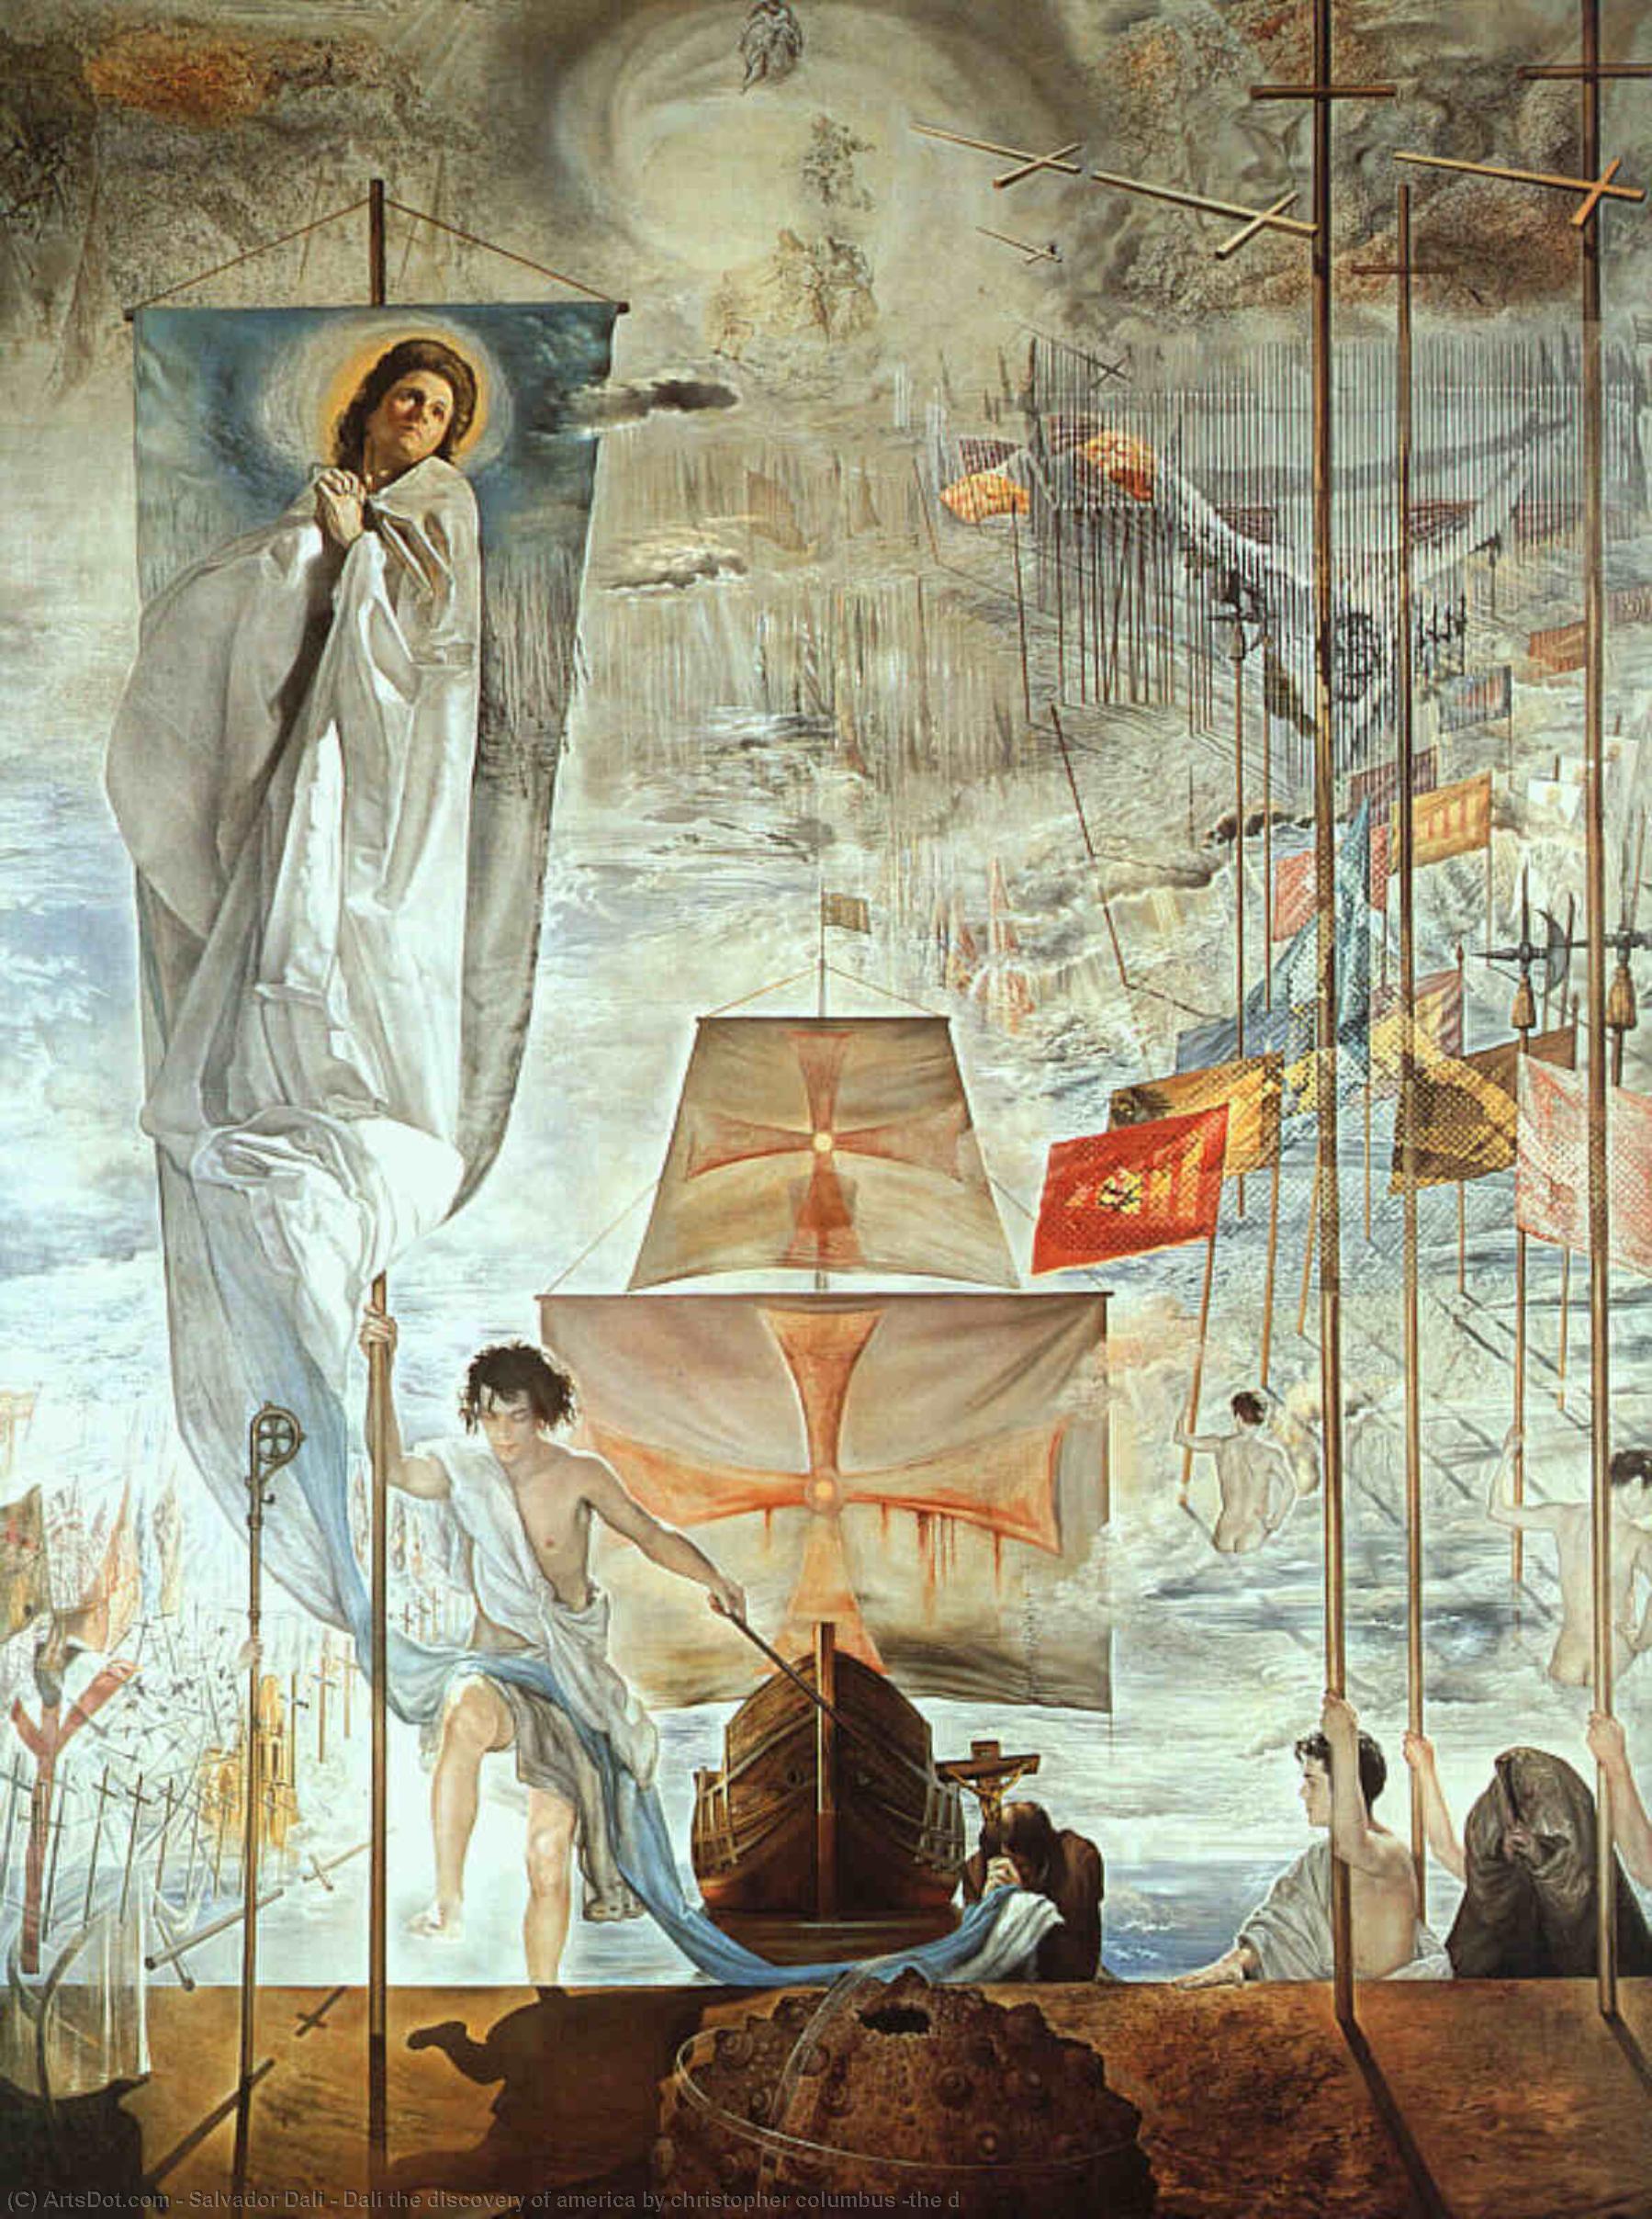 WikiOO.org - Encyclopedia of Fine Arts - Schilderen, Artwork Salvador Dali - Dalí the discovery of america by christopher columbus (the d